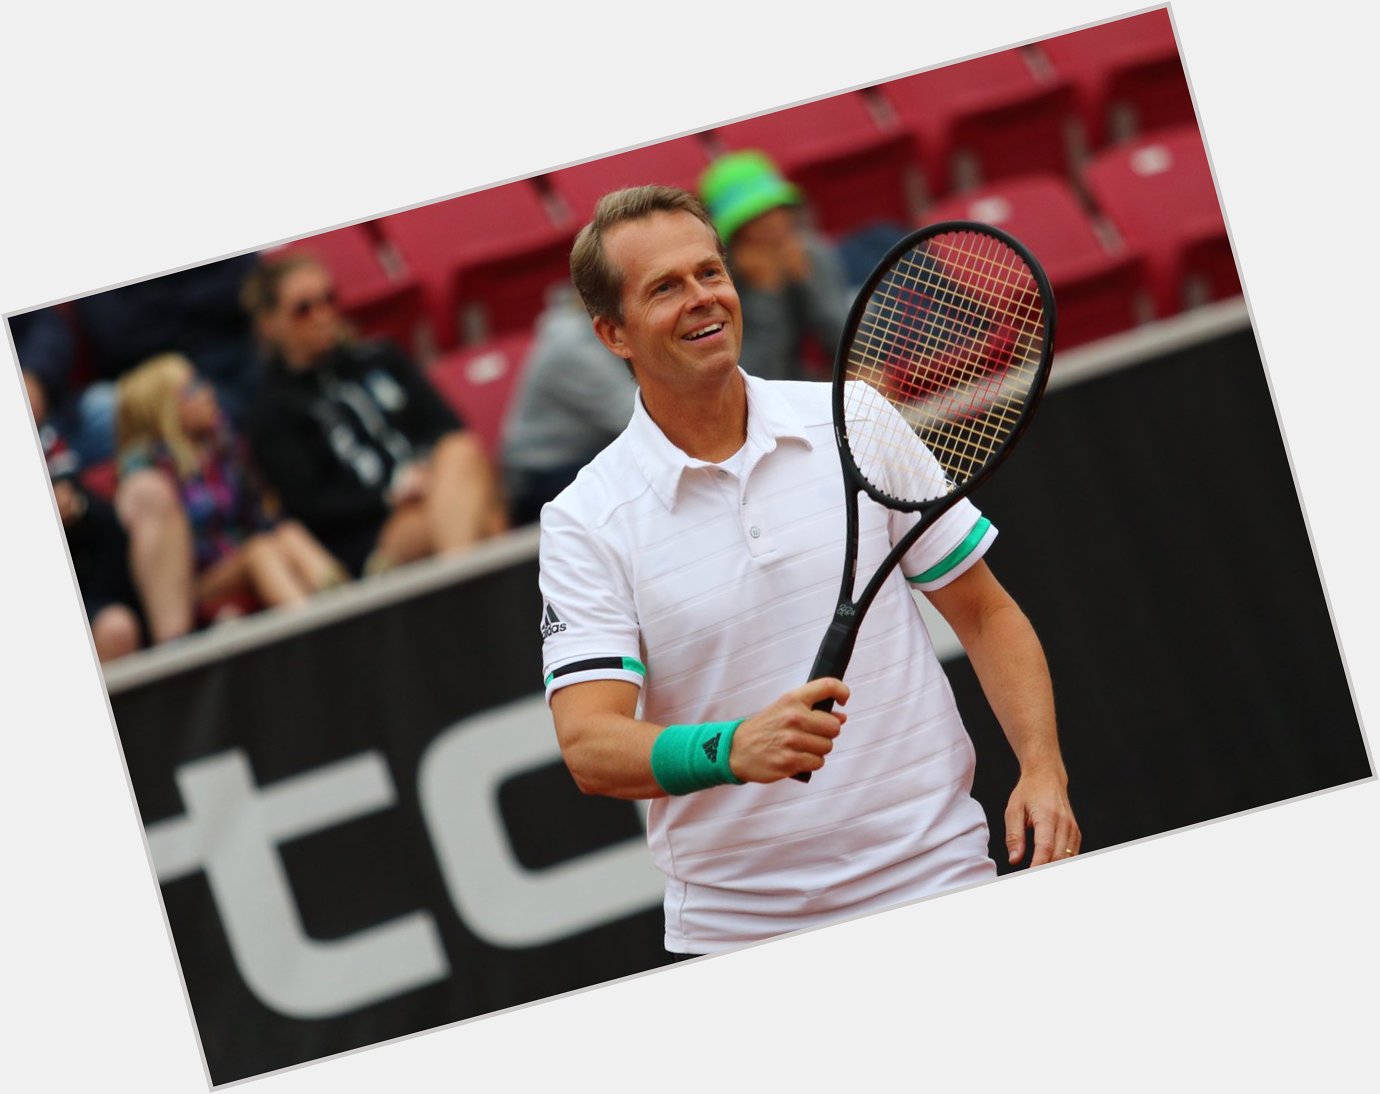 52, who could have guessed? Happy birthday Stefan Edberg. 